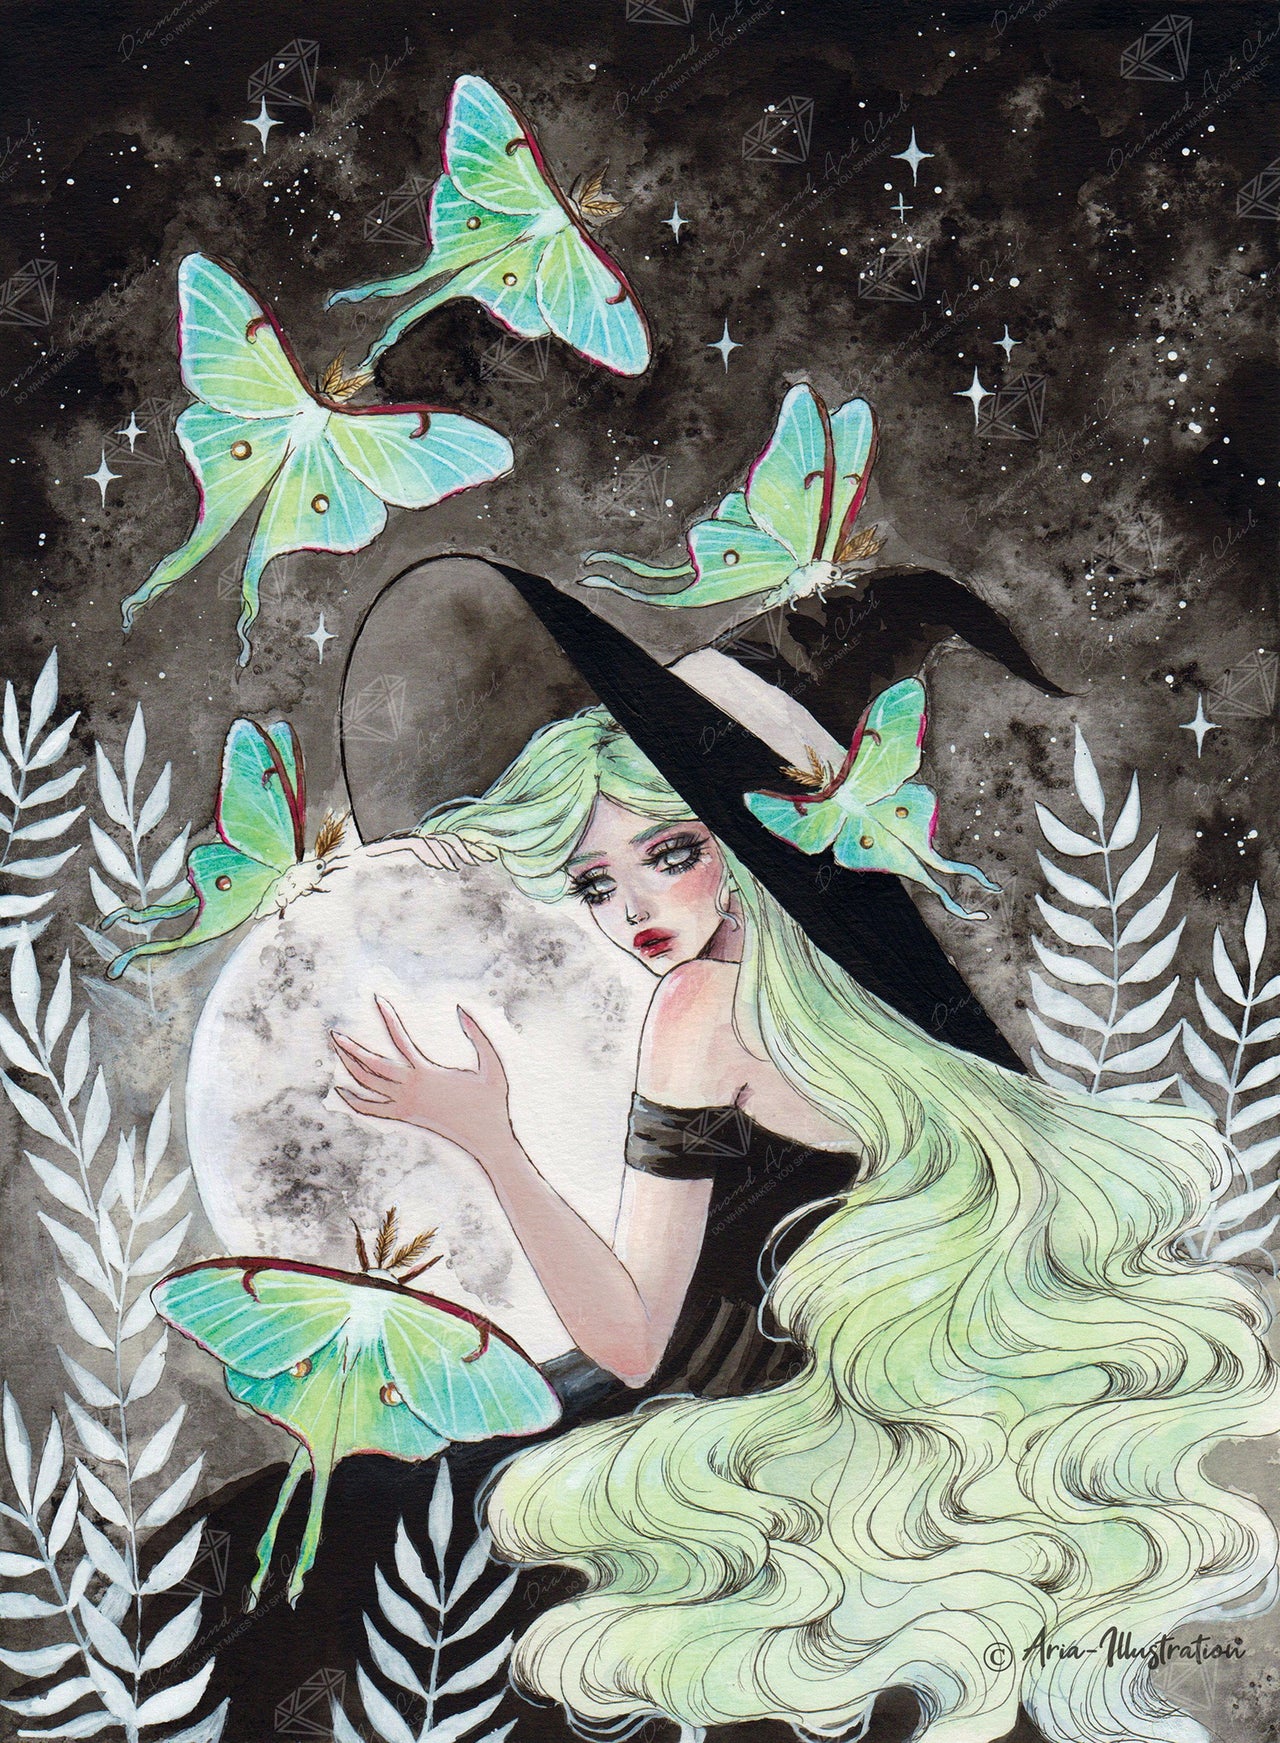 Diamond Painting Luna Moth Witch 22" x 30" (55.8cm x 76cm) / Square with 40 Colors including 1 AB Diamonds and 2 Fairy Dust Diamonds / 68,320